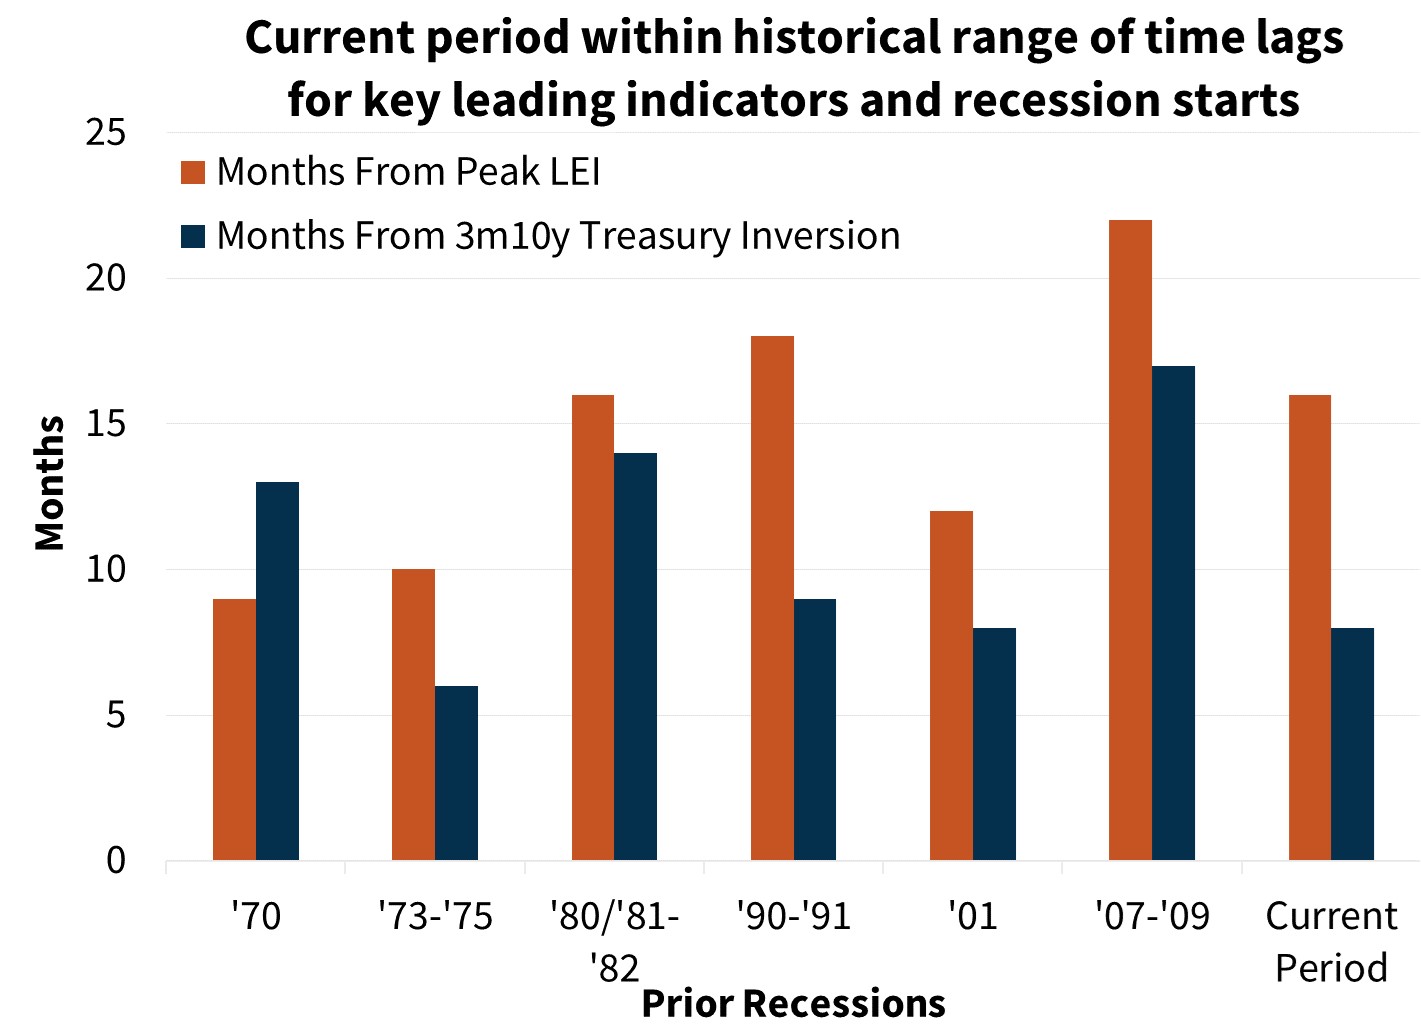  Current period within historical range of time lags for key leading indicators and recession starts
